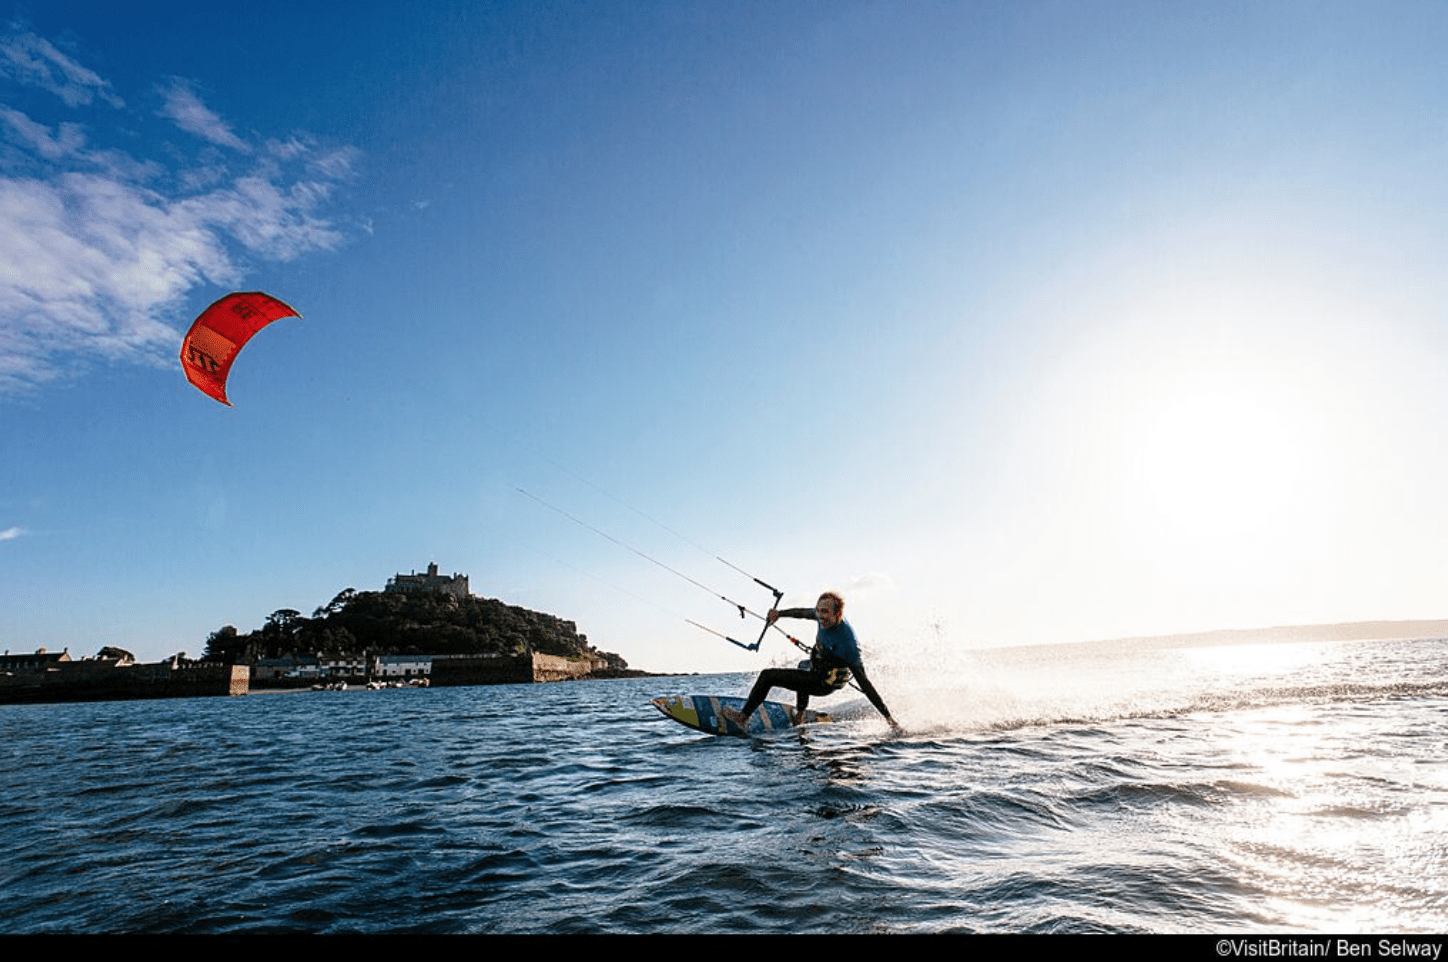 From Coasteering to Surfing